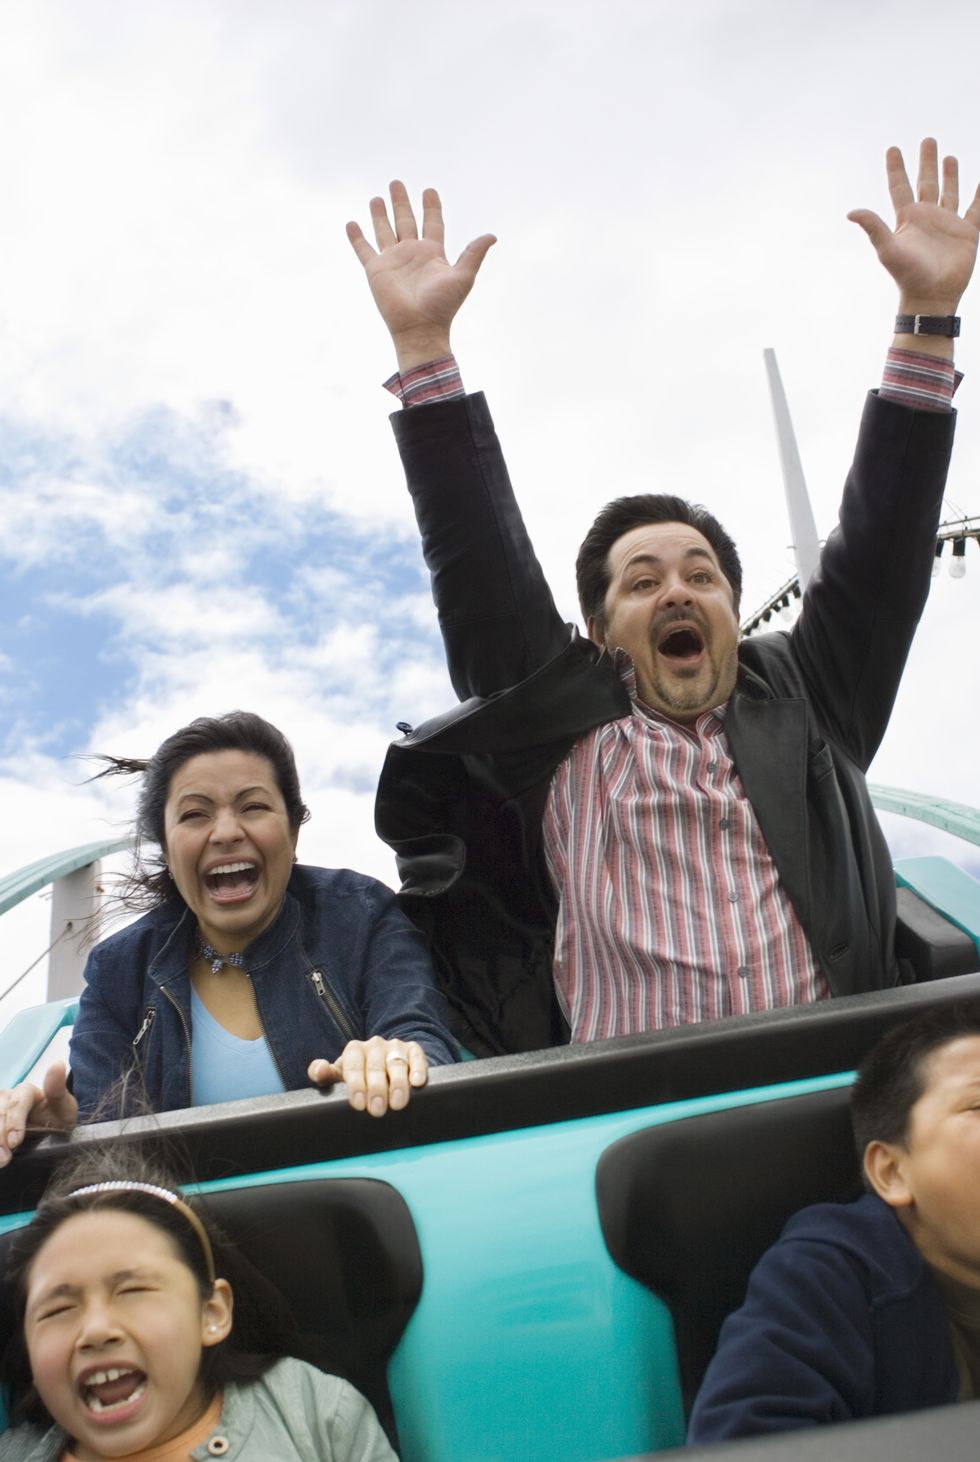 family riding rollercoaster, father with hands up in air